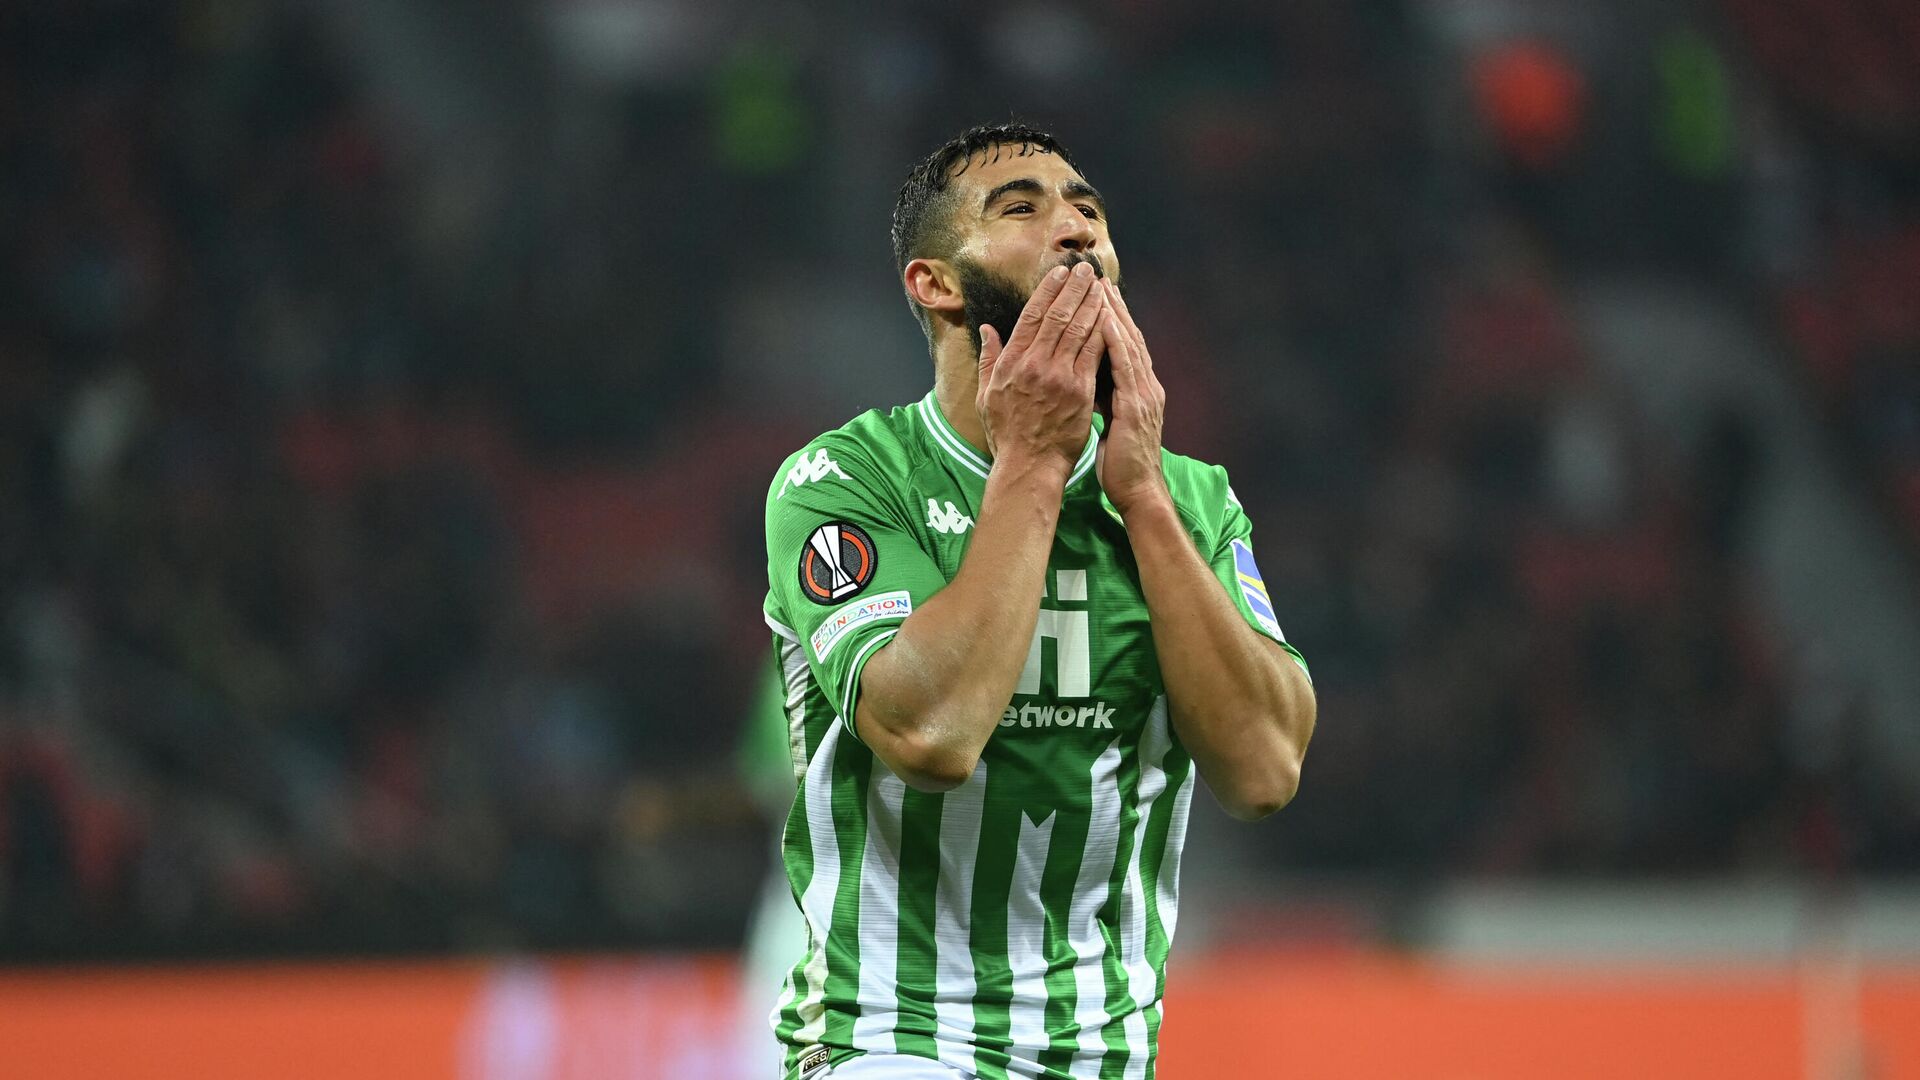 Real Betis' French midfielder Nabil Fekir reacts during the UEFA Europa League Group G football match  Bayer 04 Leverkusen v Real Betis in Leverkusen, western Germany, on November 4, 2021. (Photo by Ina Fassbender / AFP) - РИА Новости, 1920, 21.11.2021